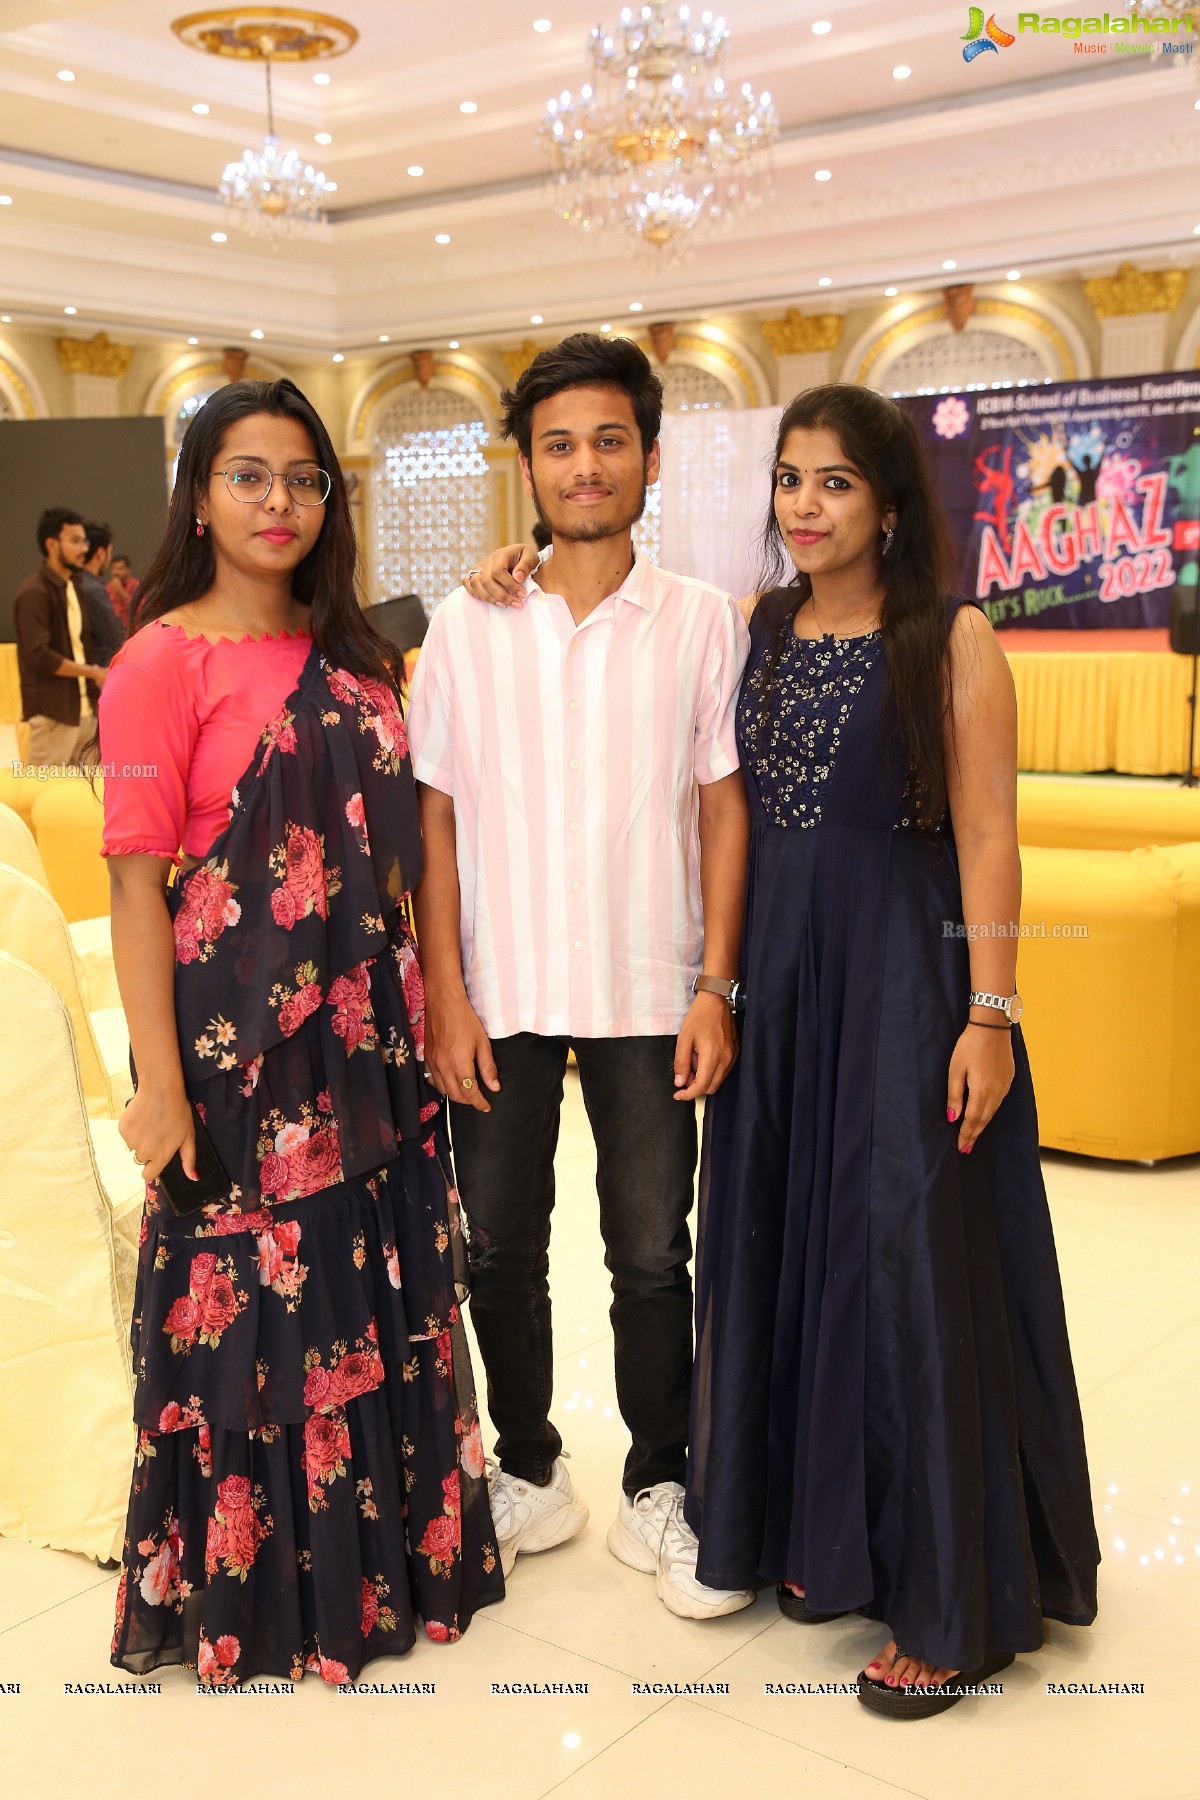 ICBM - School of Business Excellence Grand Freshers Event 2022